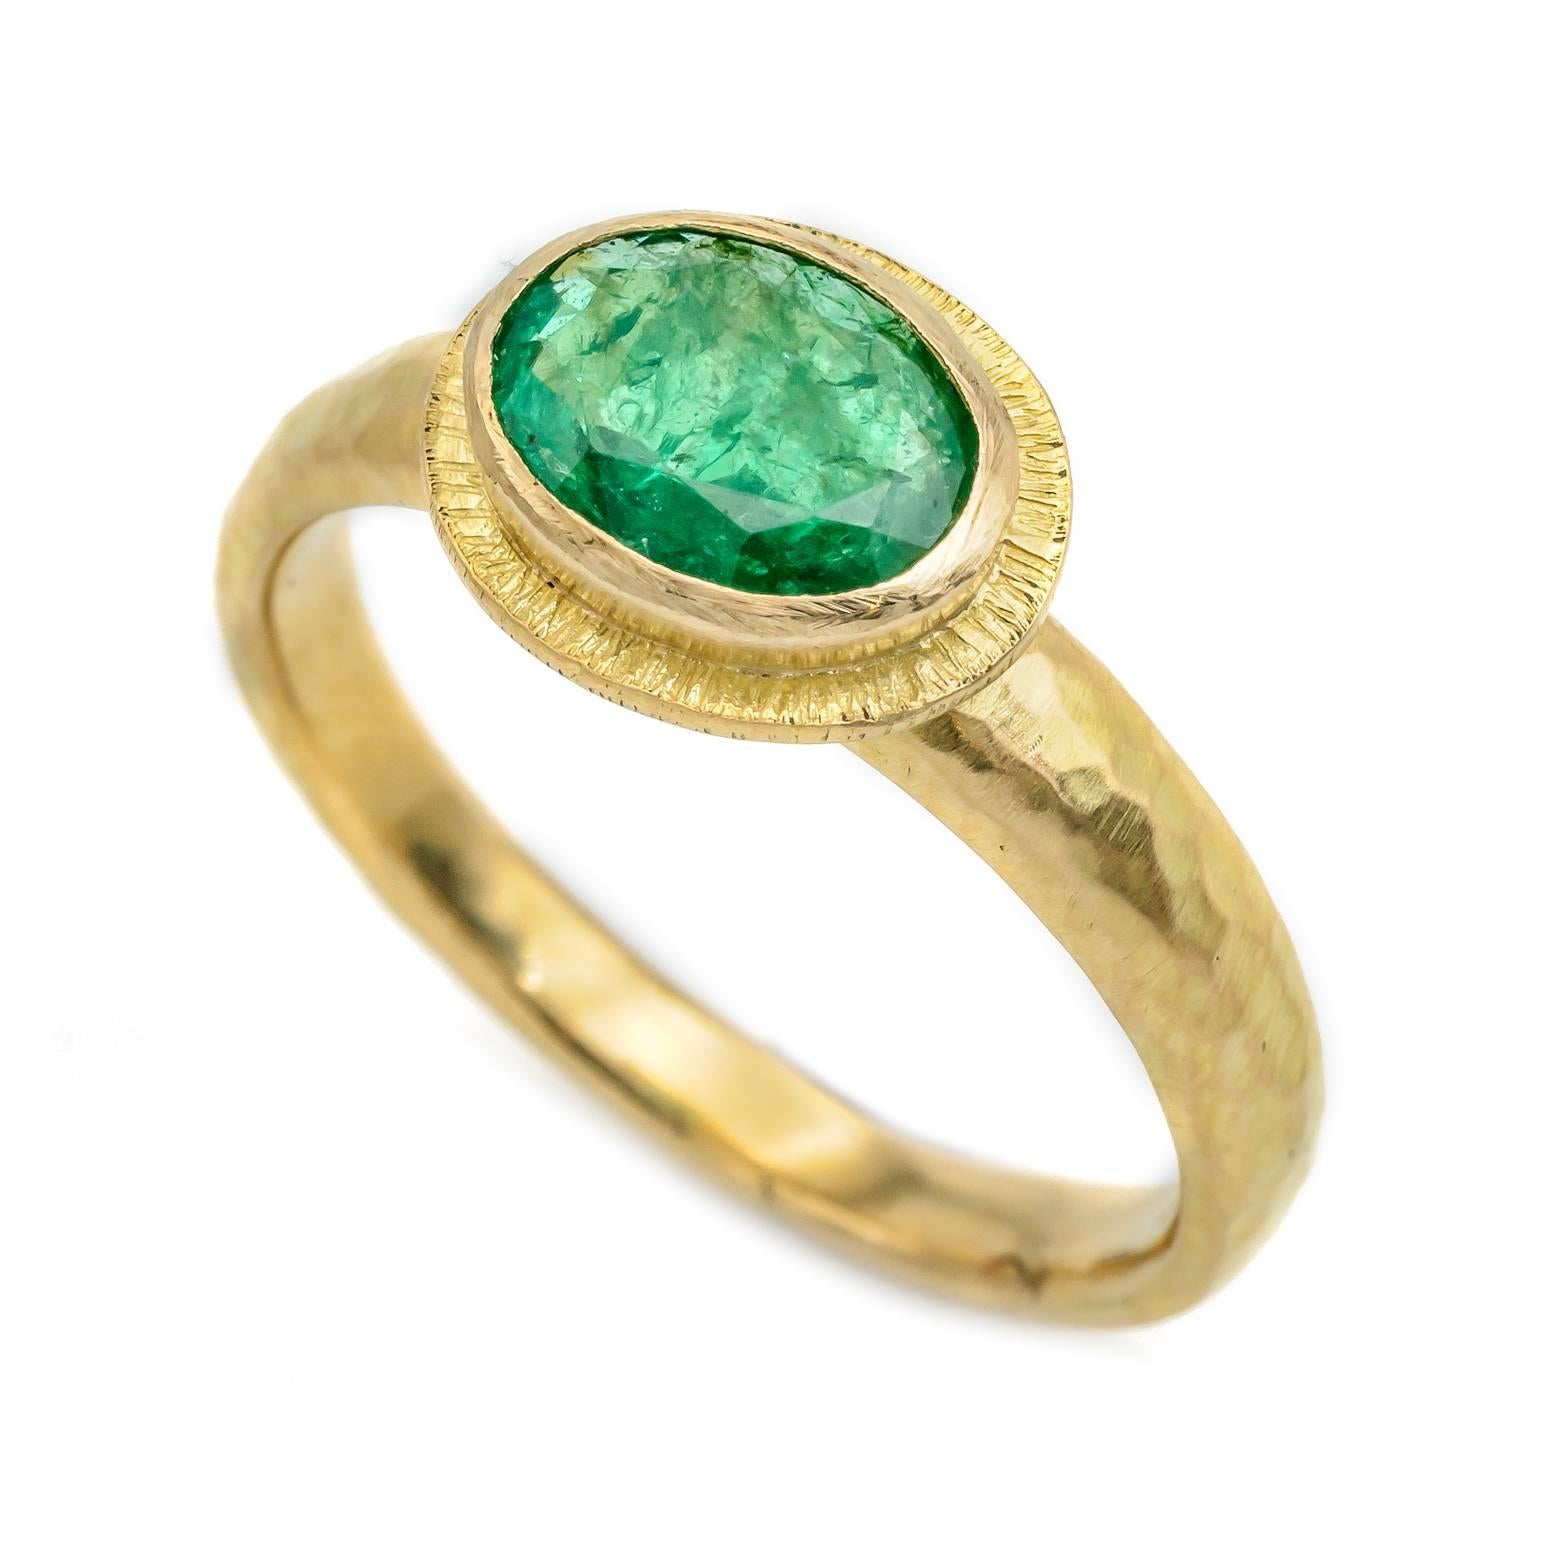 Women's Oval Emerald Ring in 18 Karat Yellow Gold, Hammered and Textured, 0.90 Carat